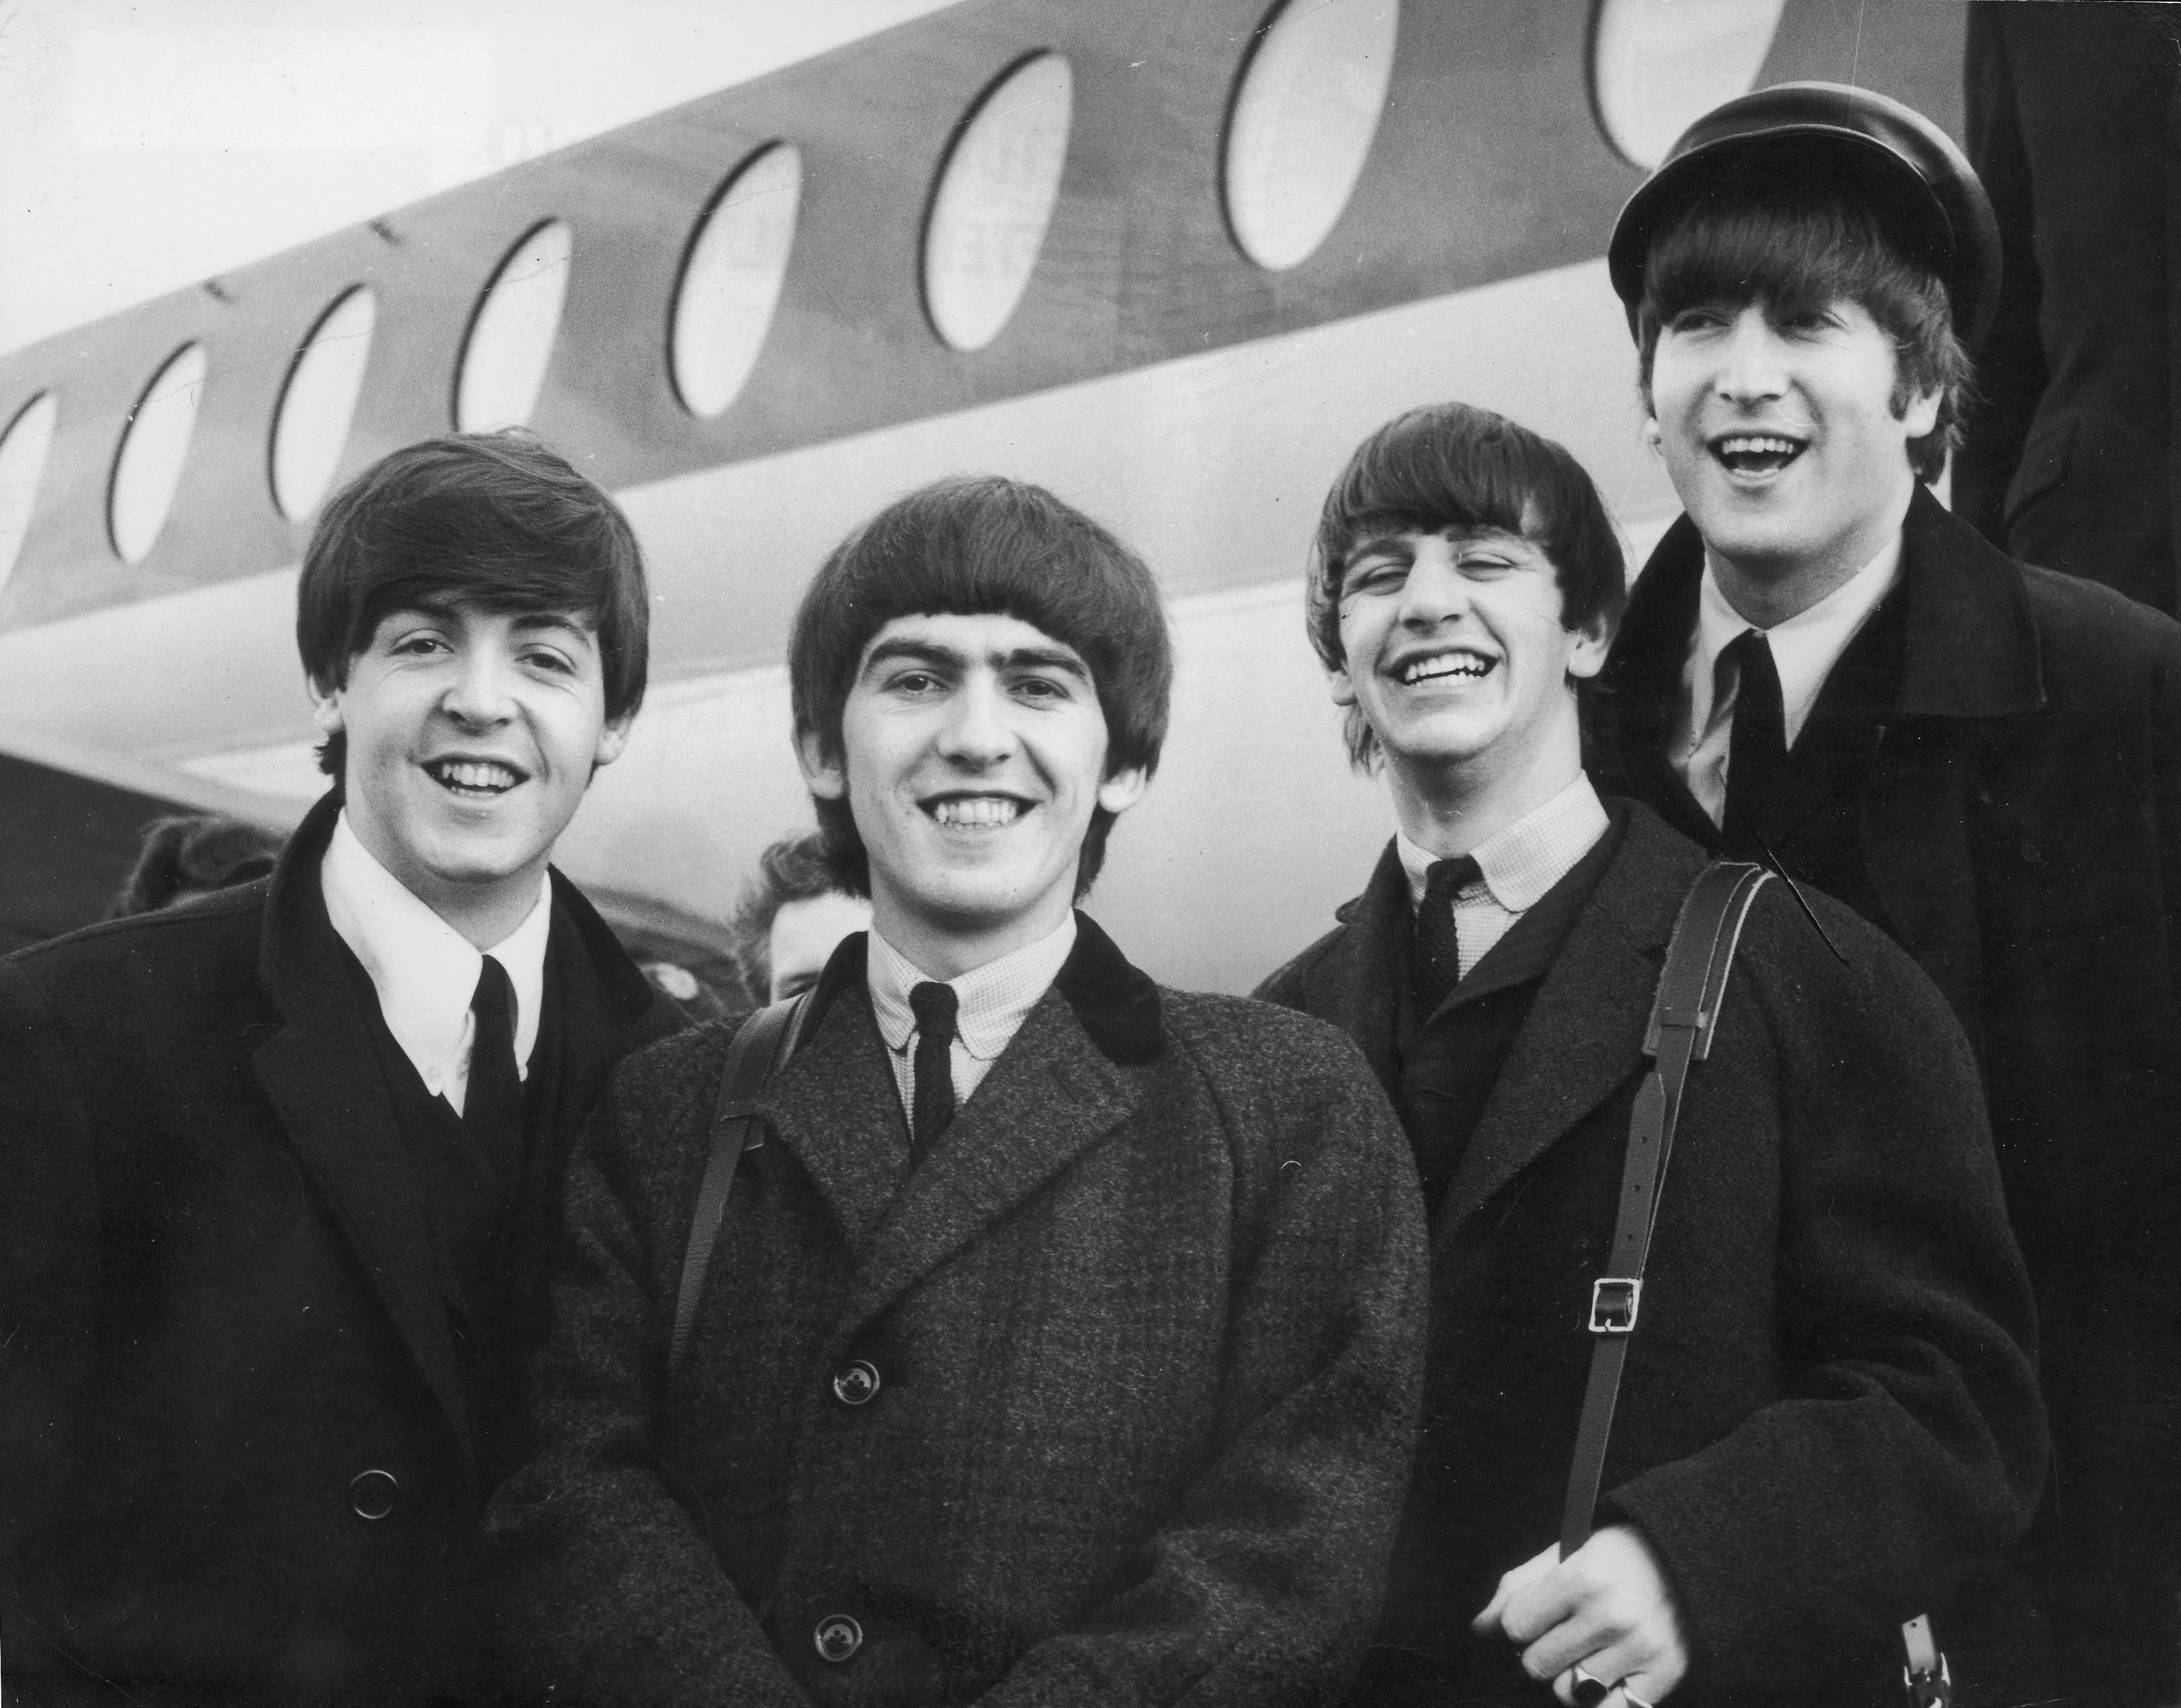 The Beatles, left to right, Paul McCartney, George Harrison, Ringo Starr, and John Lennon arrive at London Airport